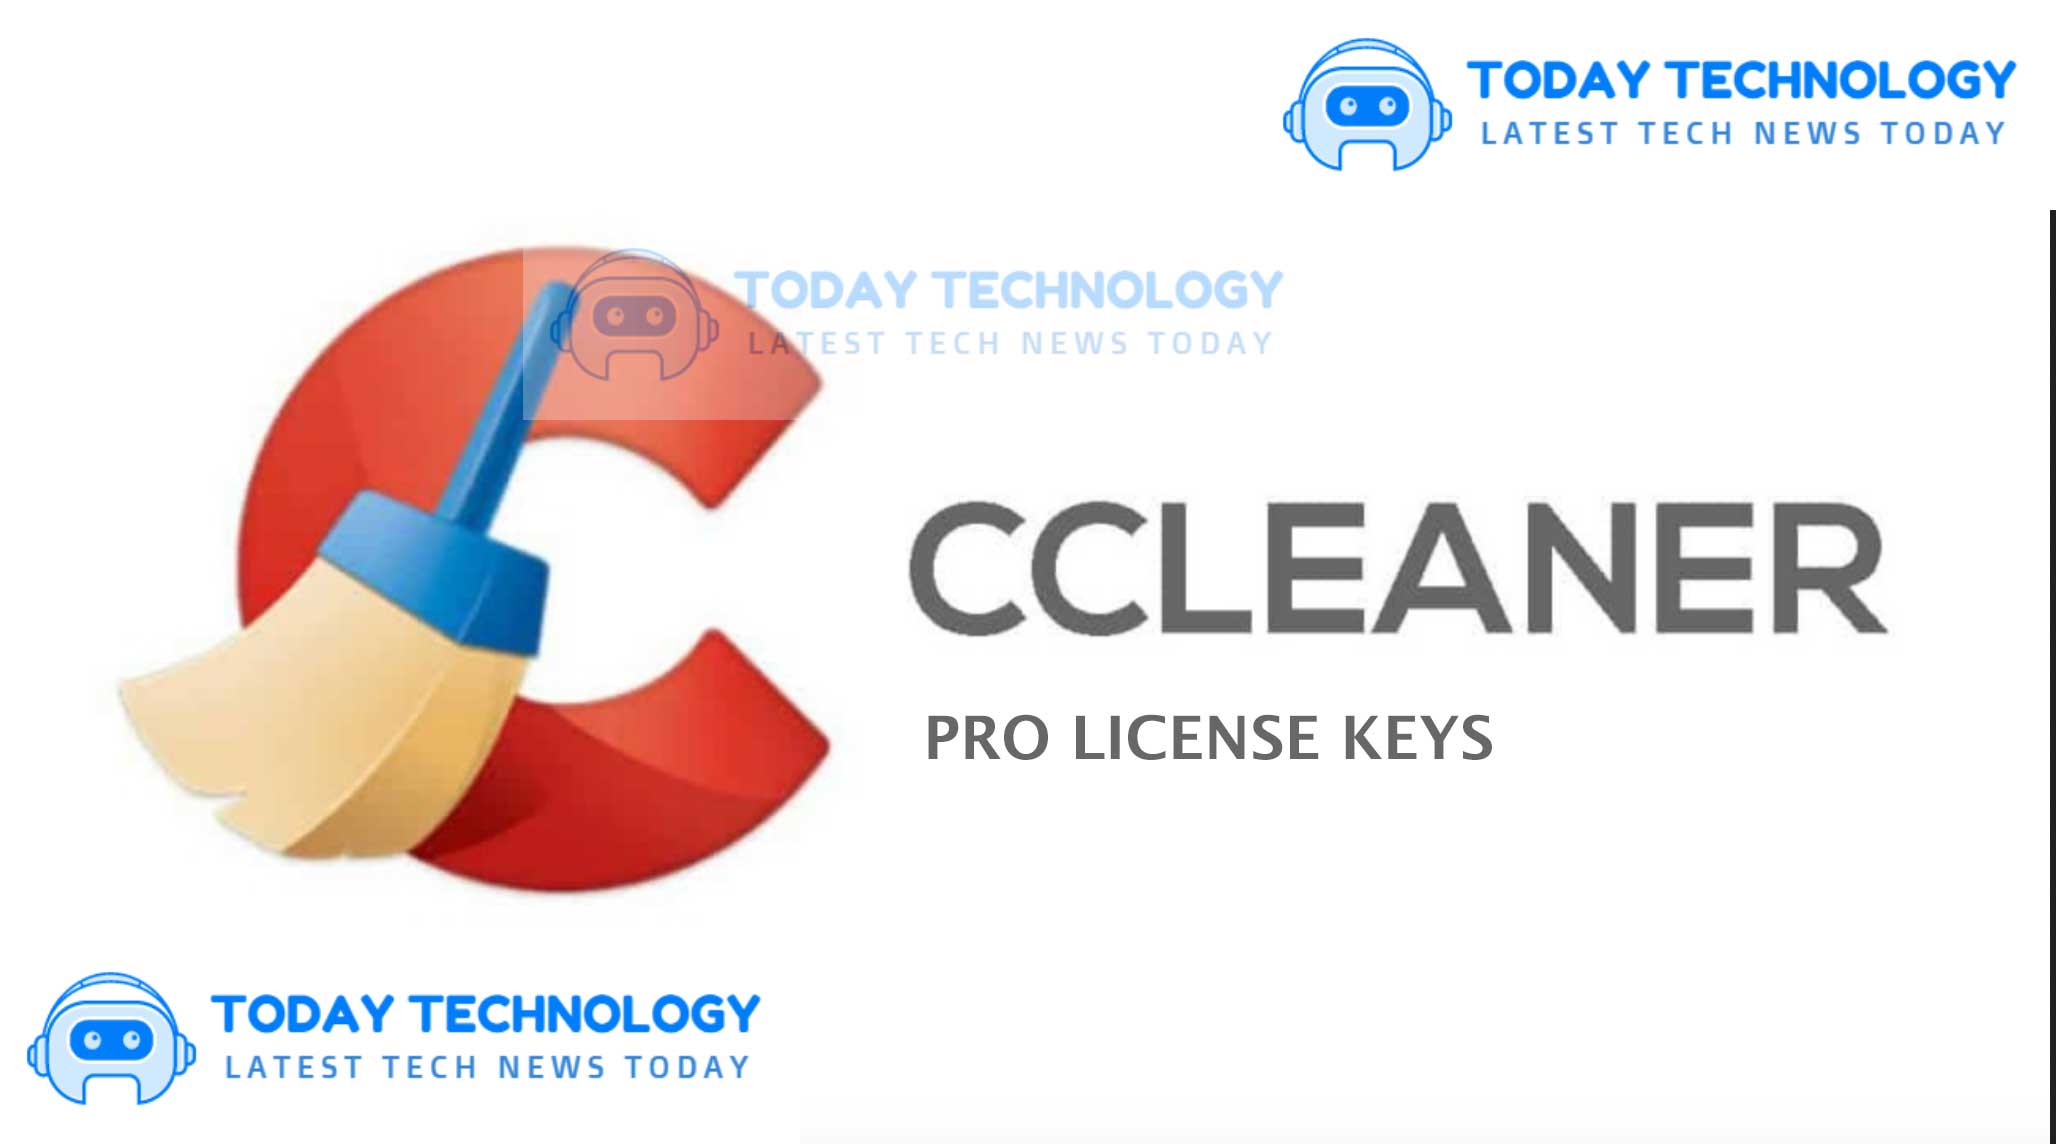 download ccleaner professional free